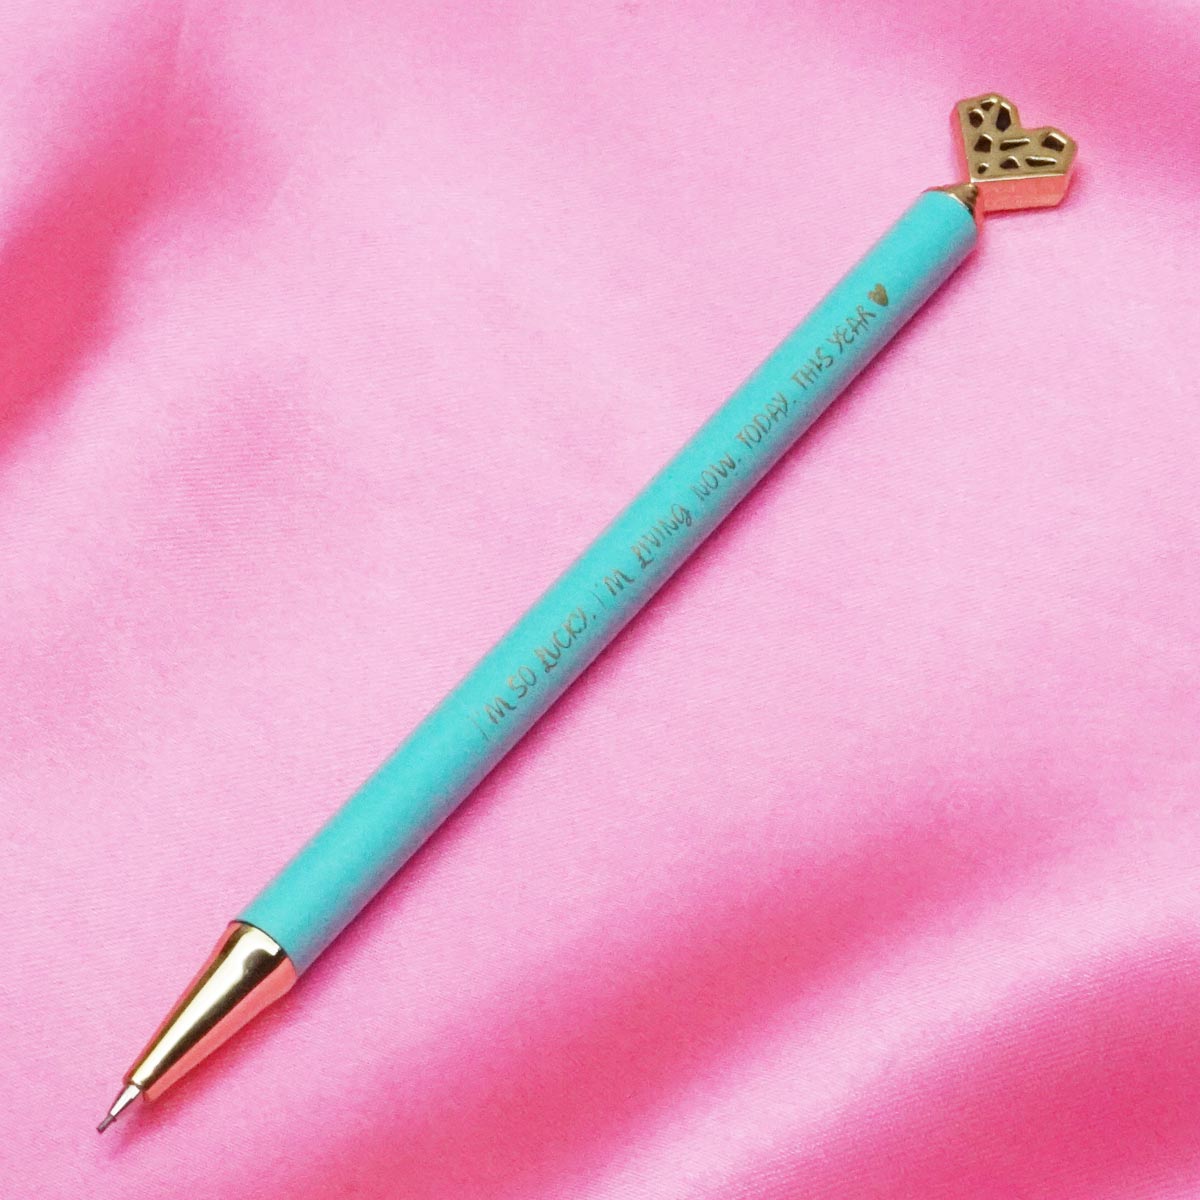 Oufeiya 5336 0.7mm Sky Blue Color Body With Gold Heart Design Top Click Led Pencil SKU 21526